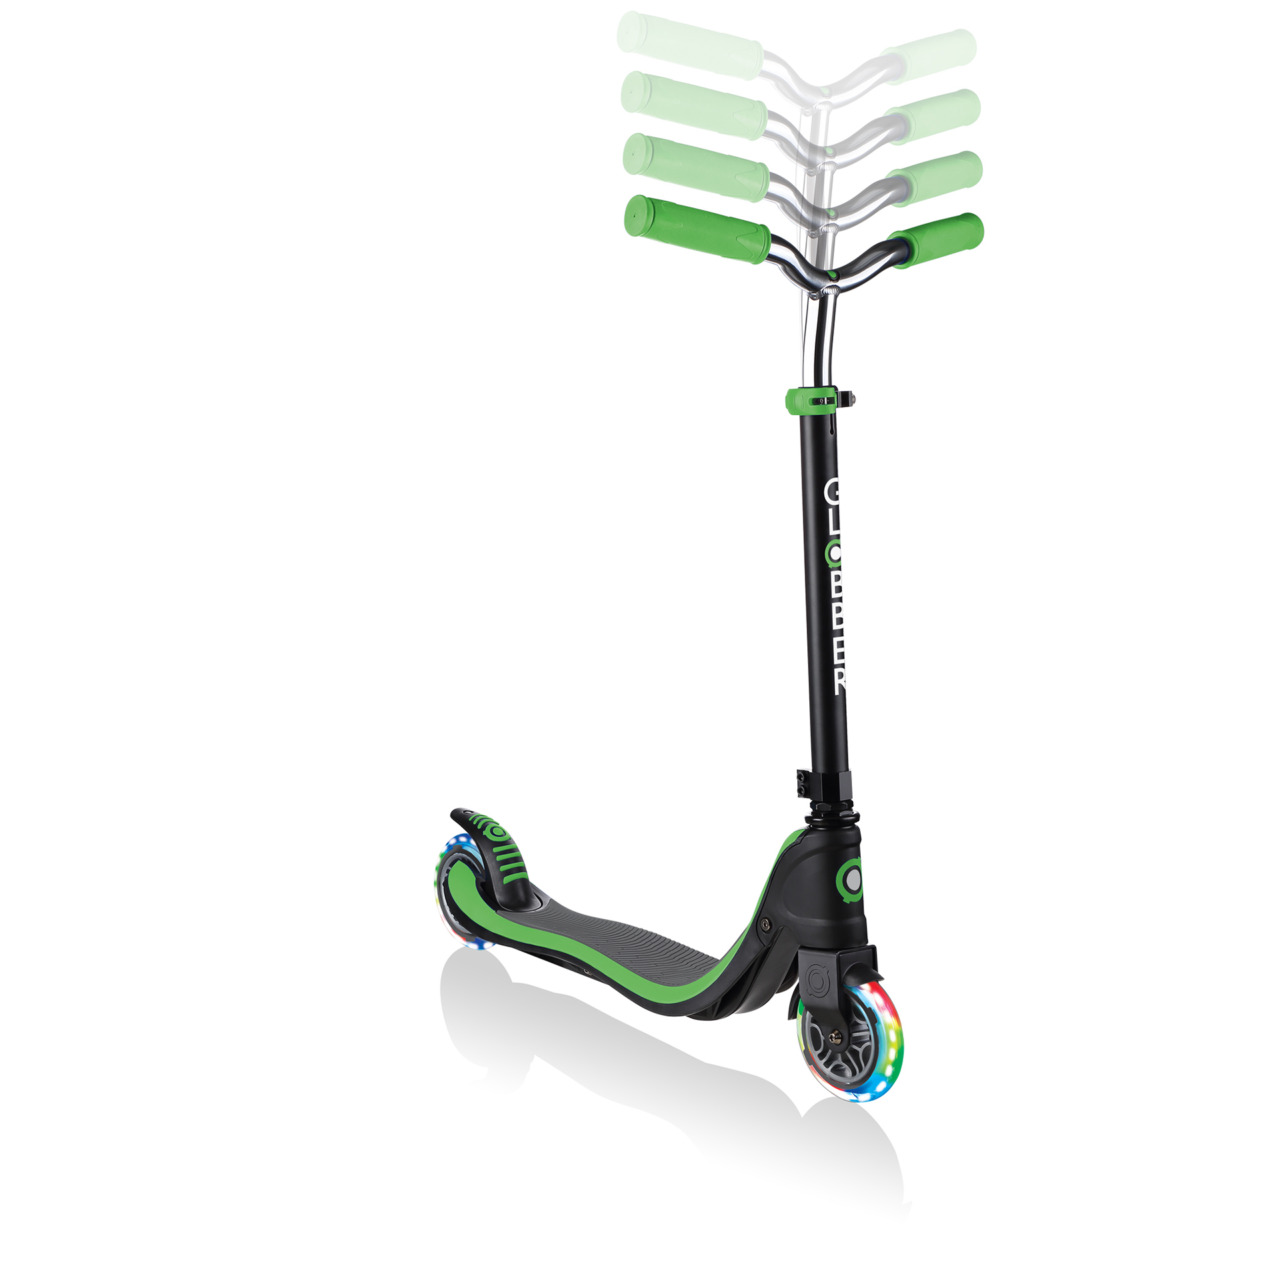 Height Adjustable Led Wheel Scooter